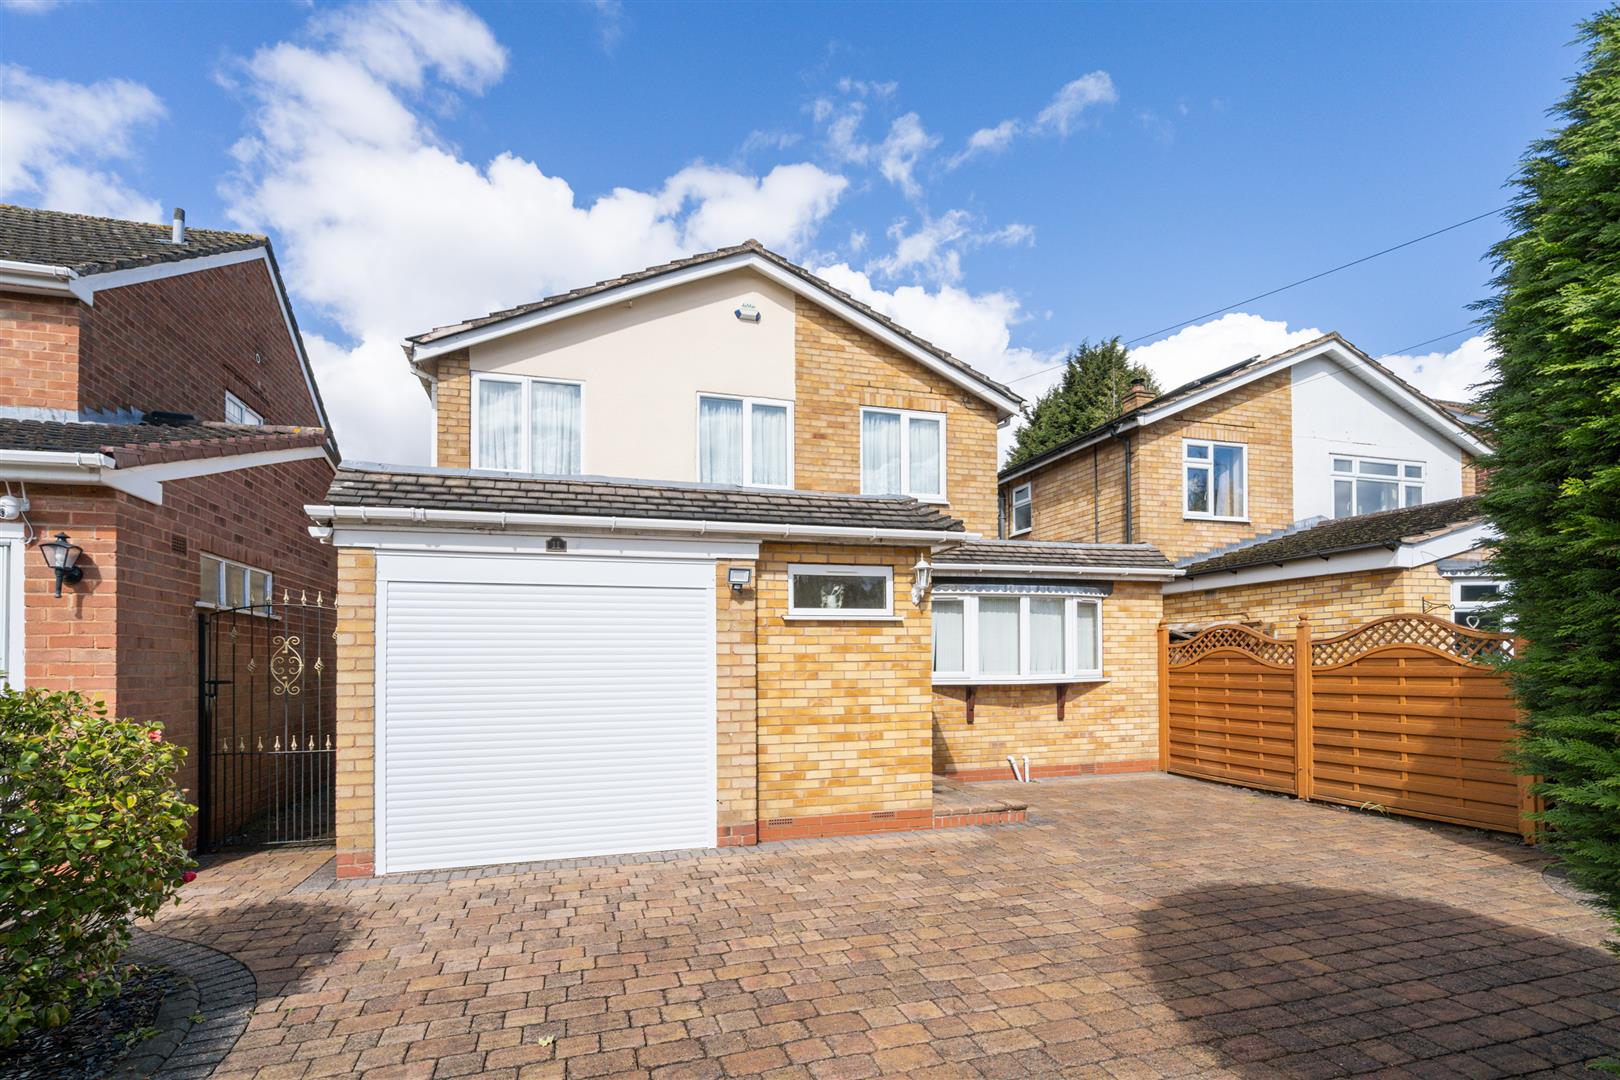 4 bed detached house for sale in Gentleshaw Lane, Solihull  - Property Image 1